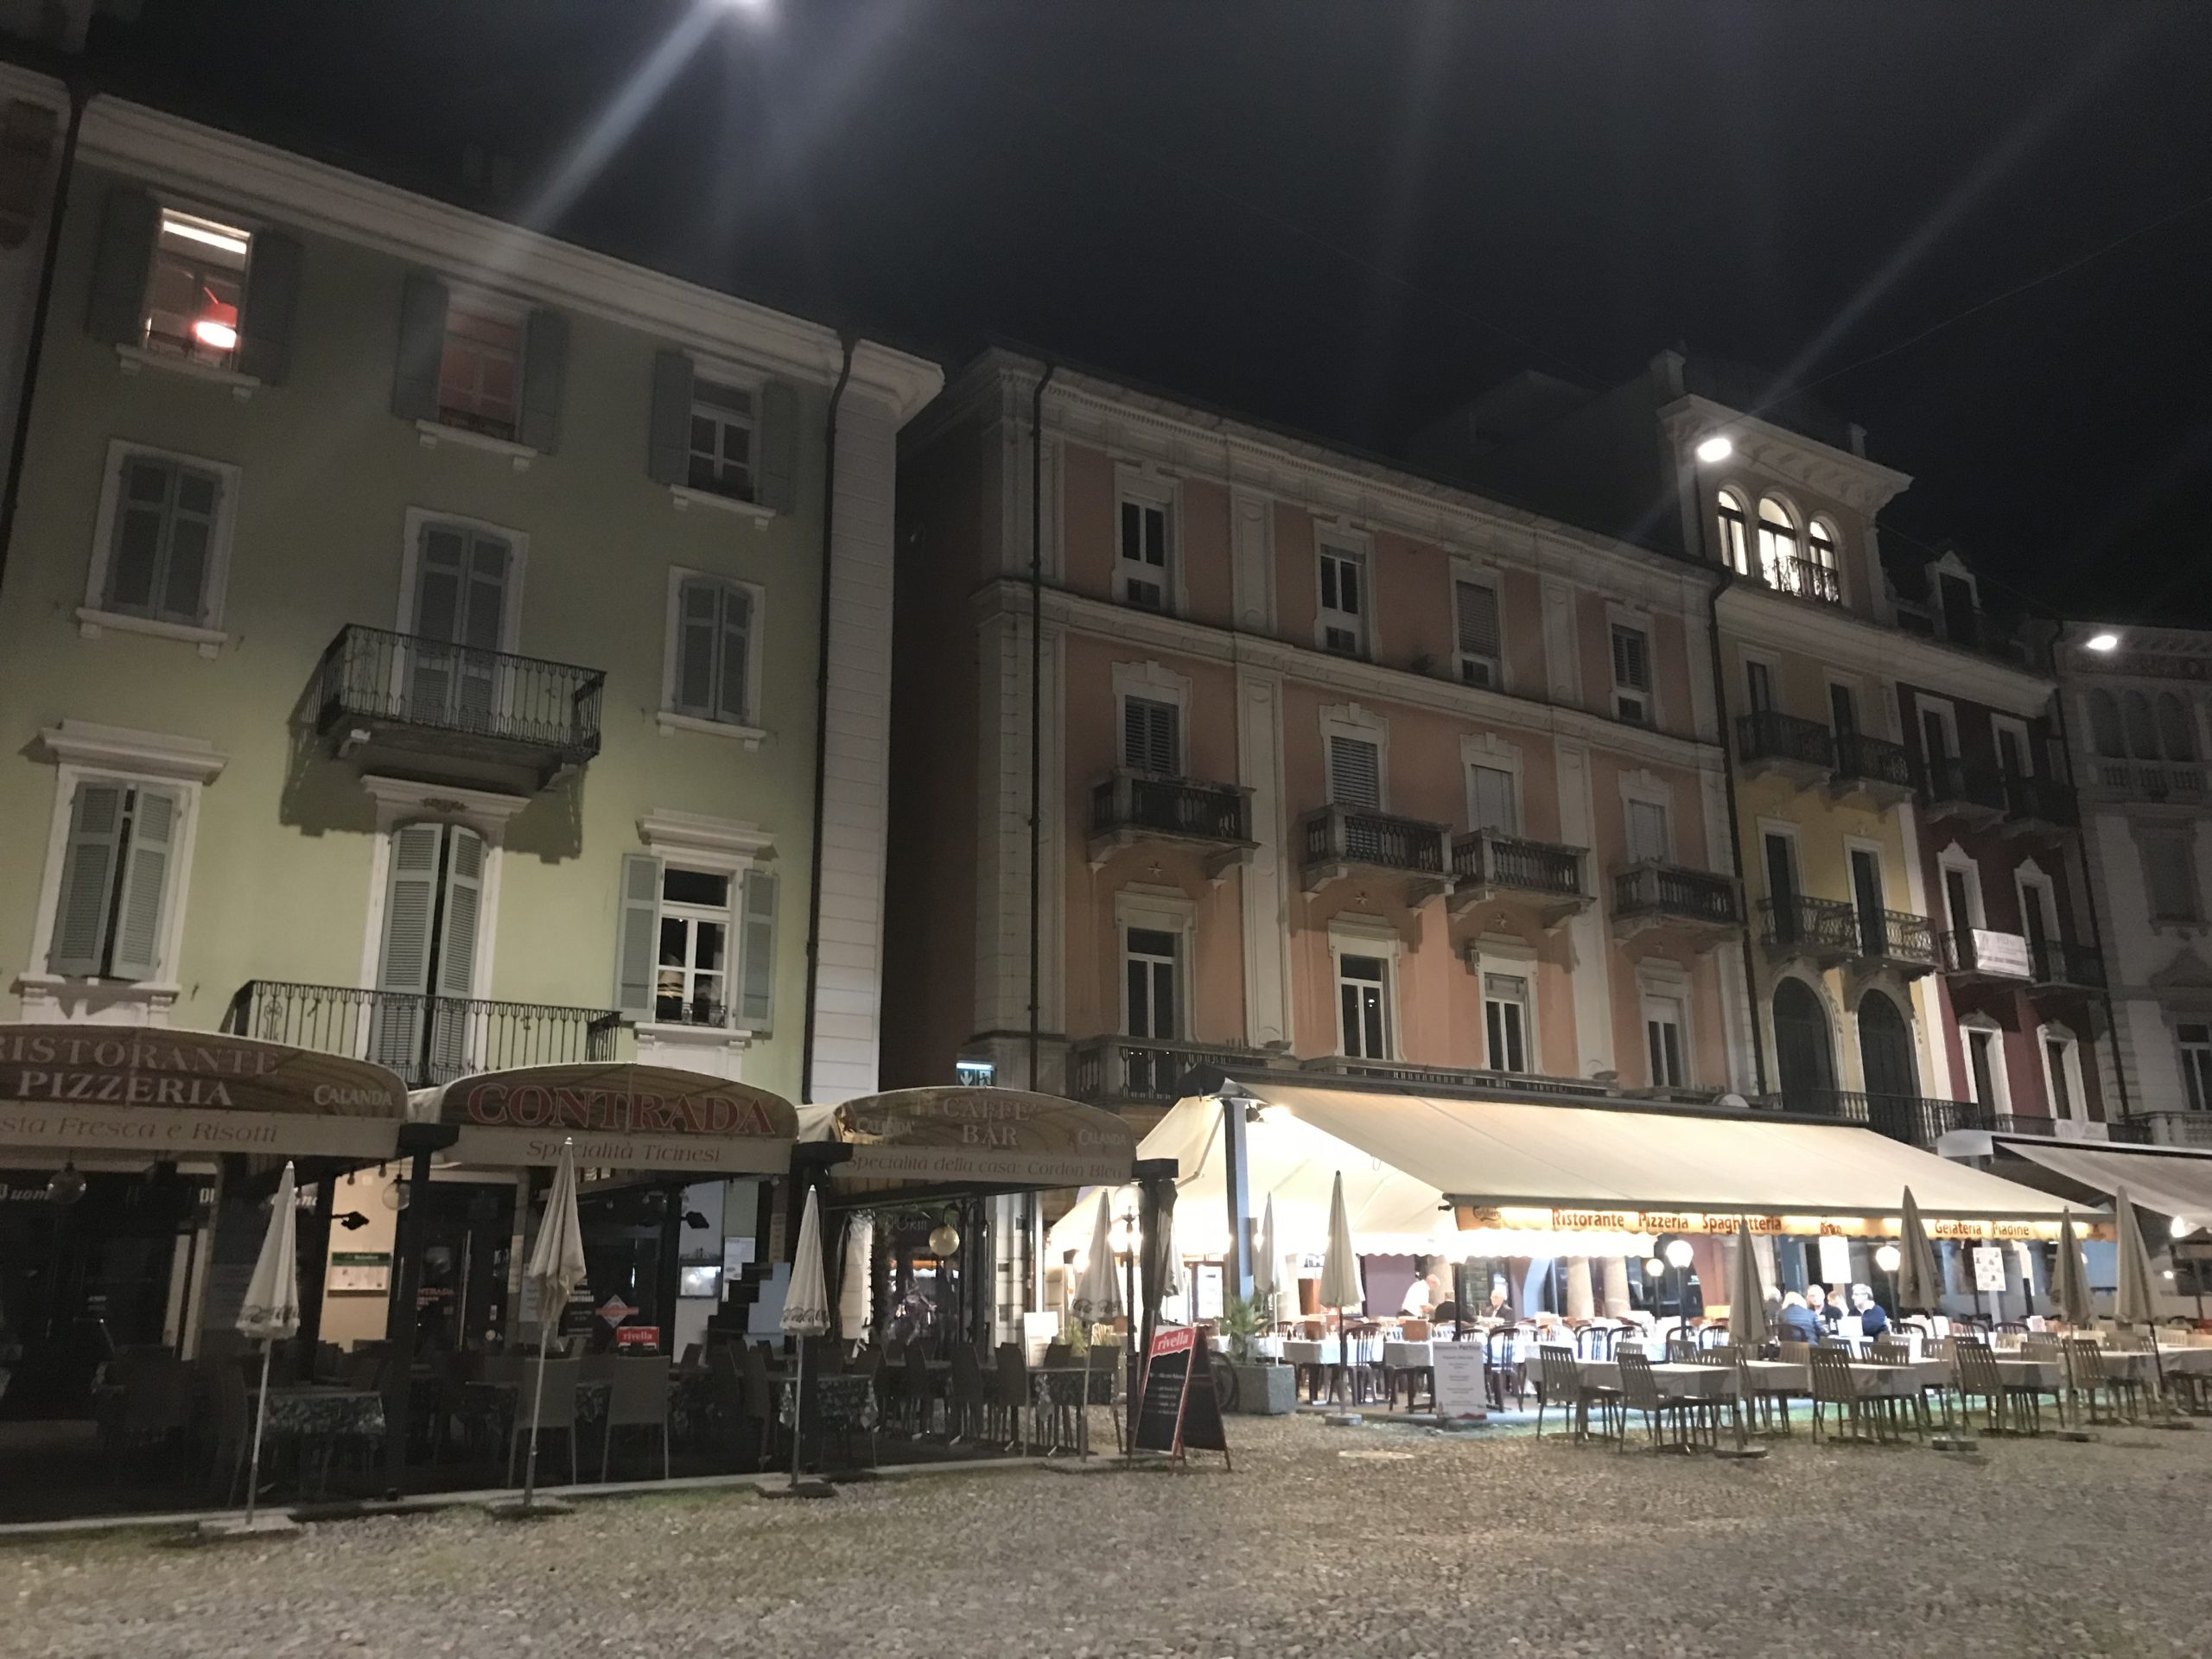 The Piazza Grande at night